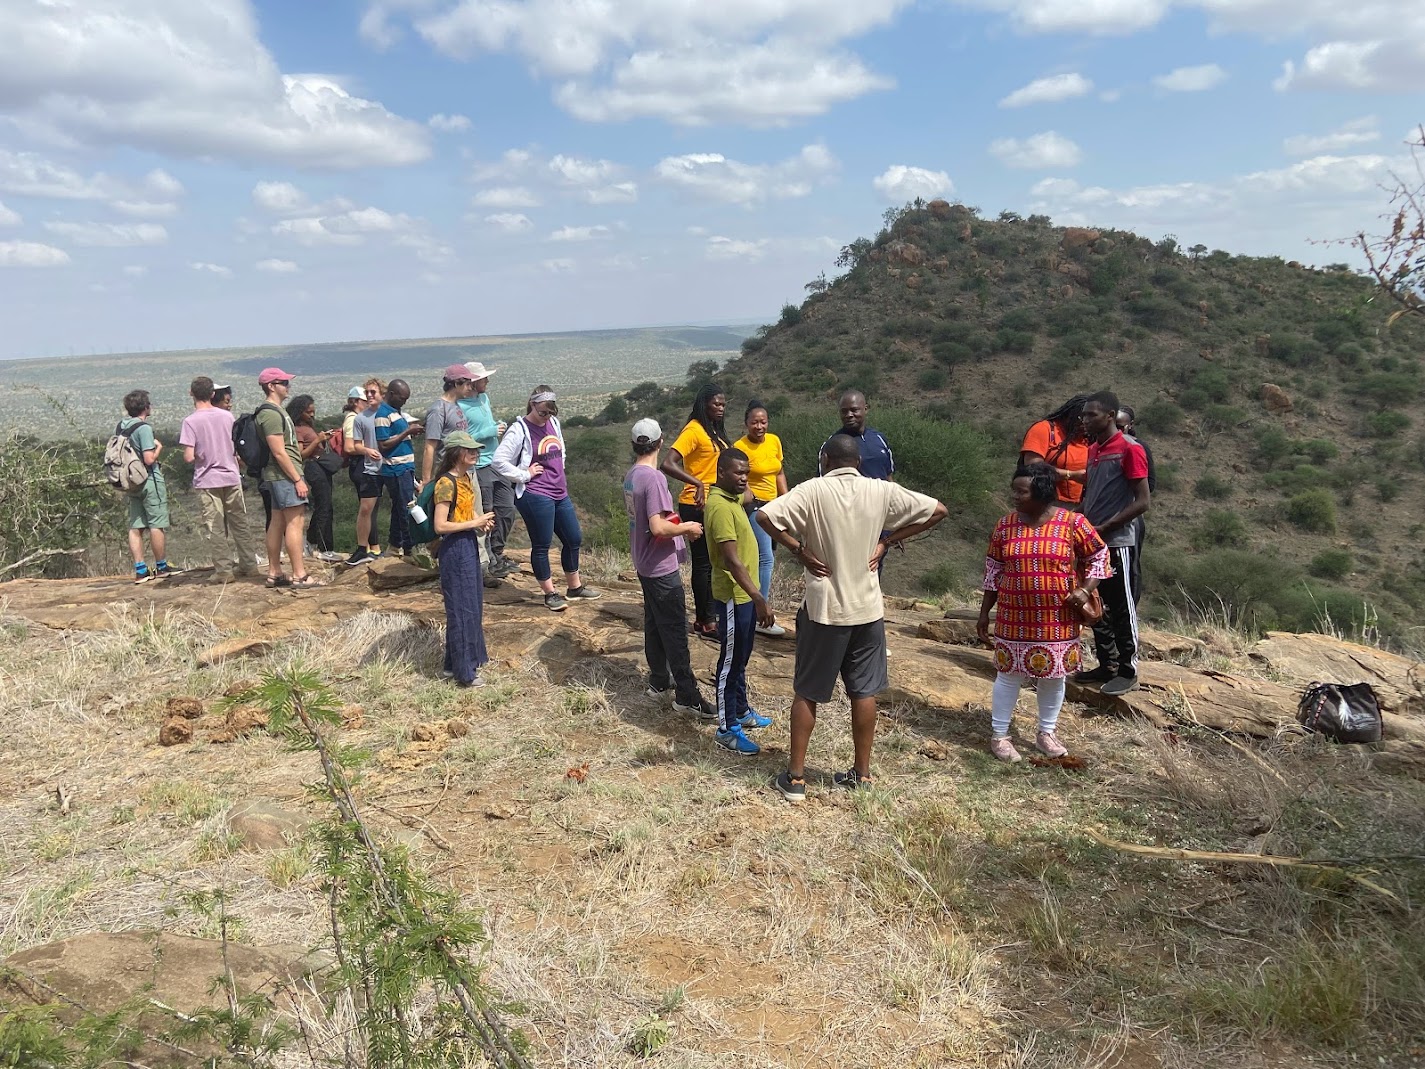 Students on a hilltop in Kenya listen to a lecture.